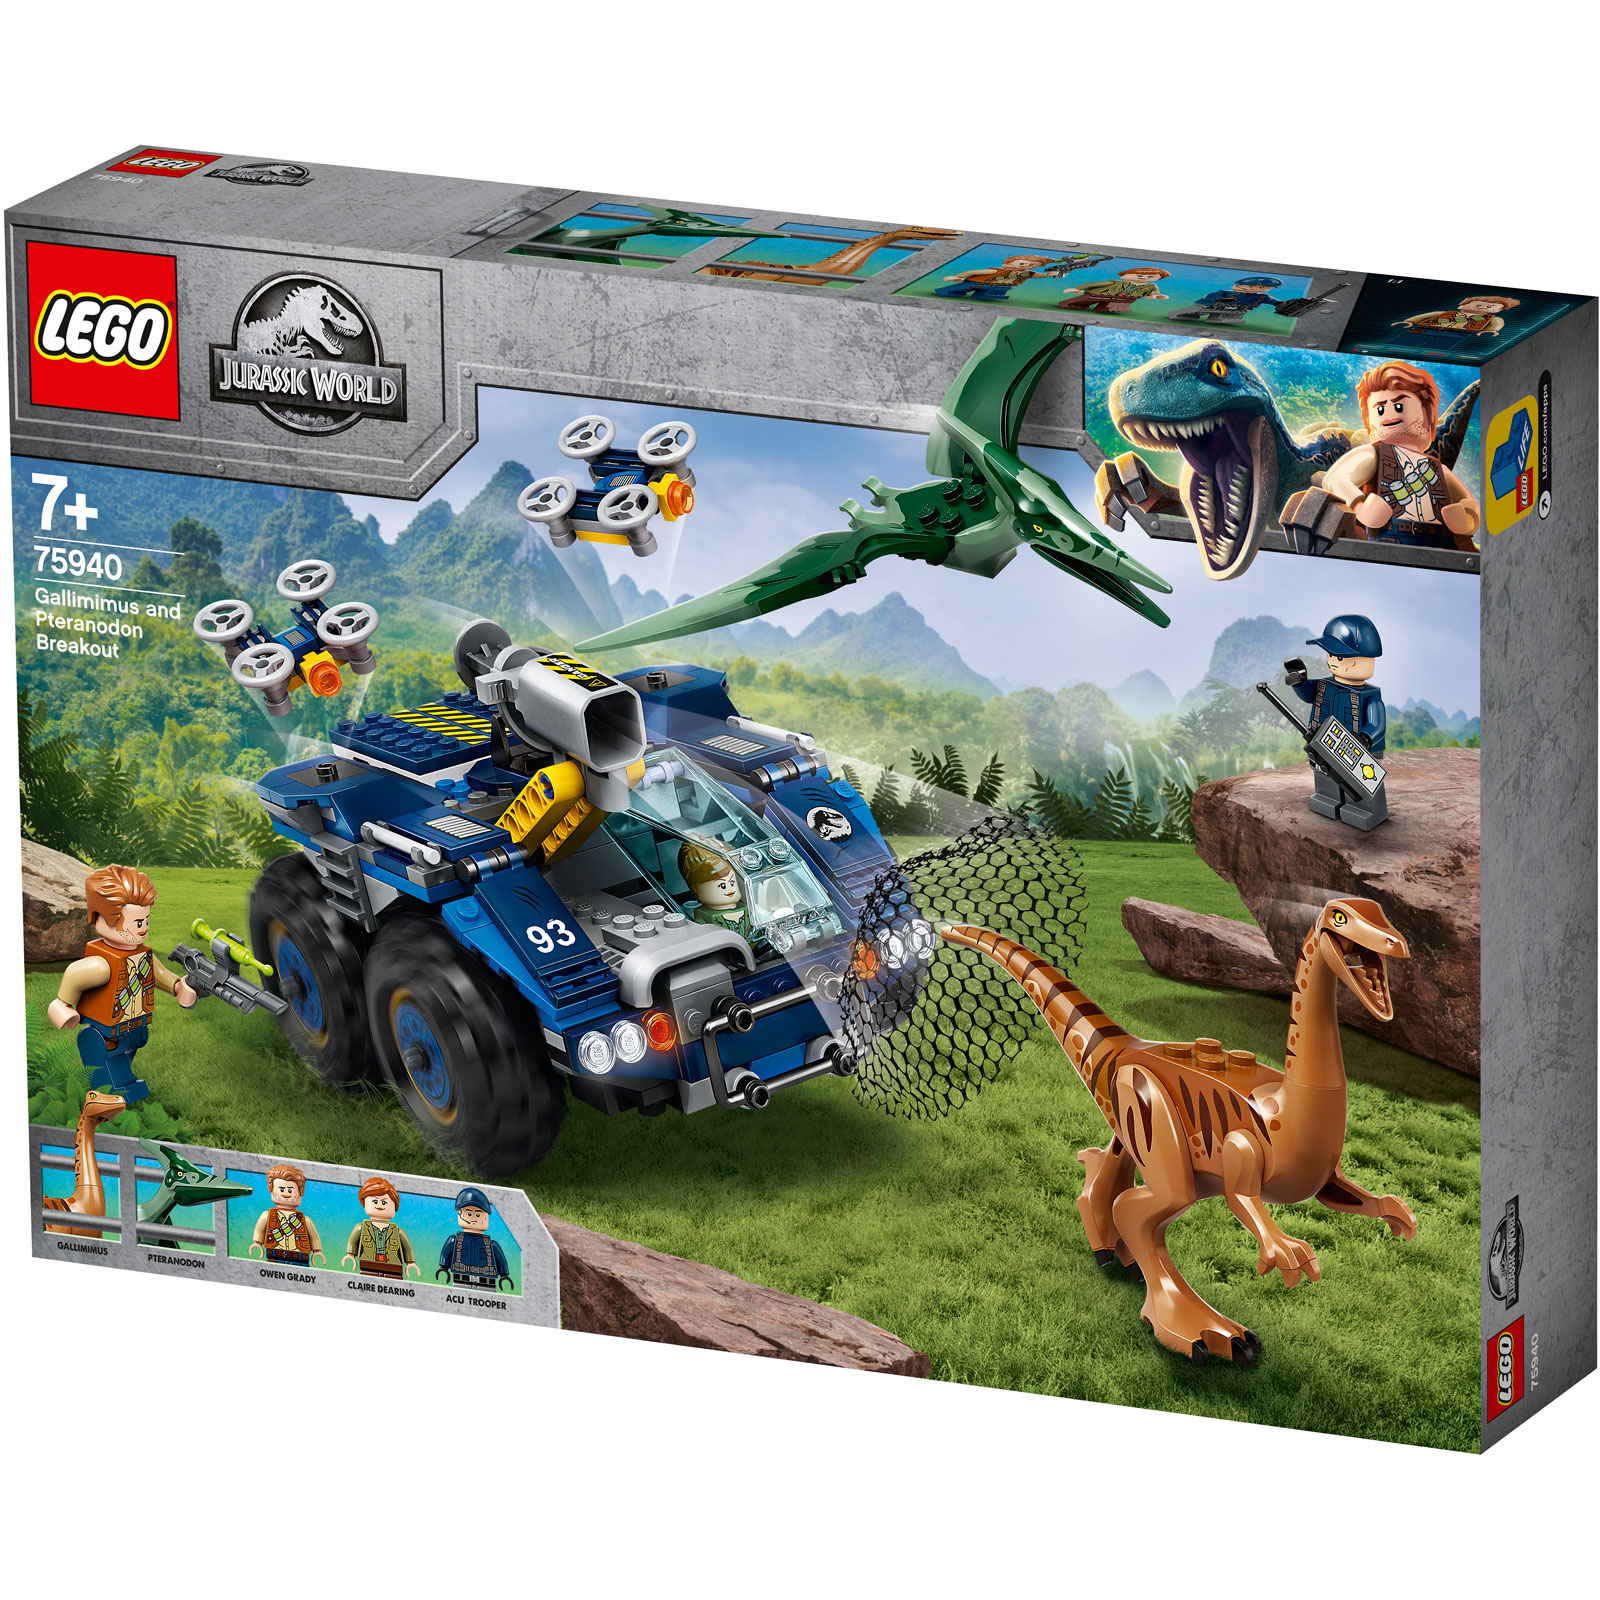 LEGO Jurassic World 75940 Building Set with Gallimimus and Pteranodon  Figures